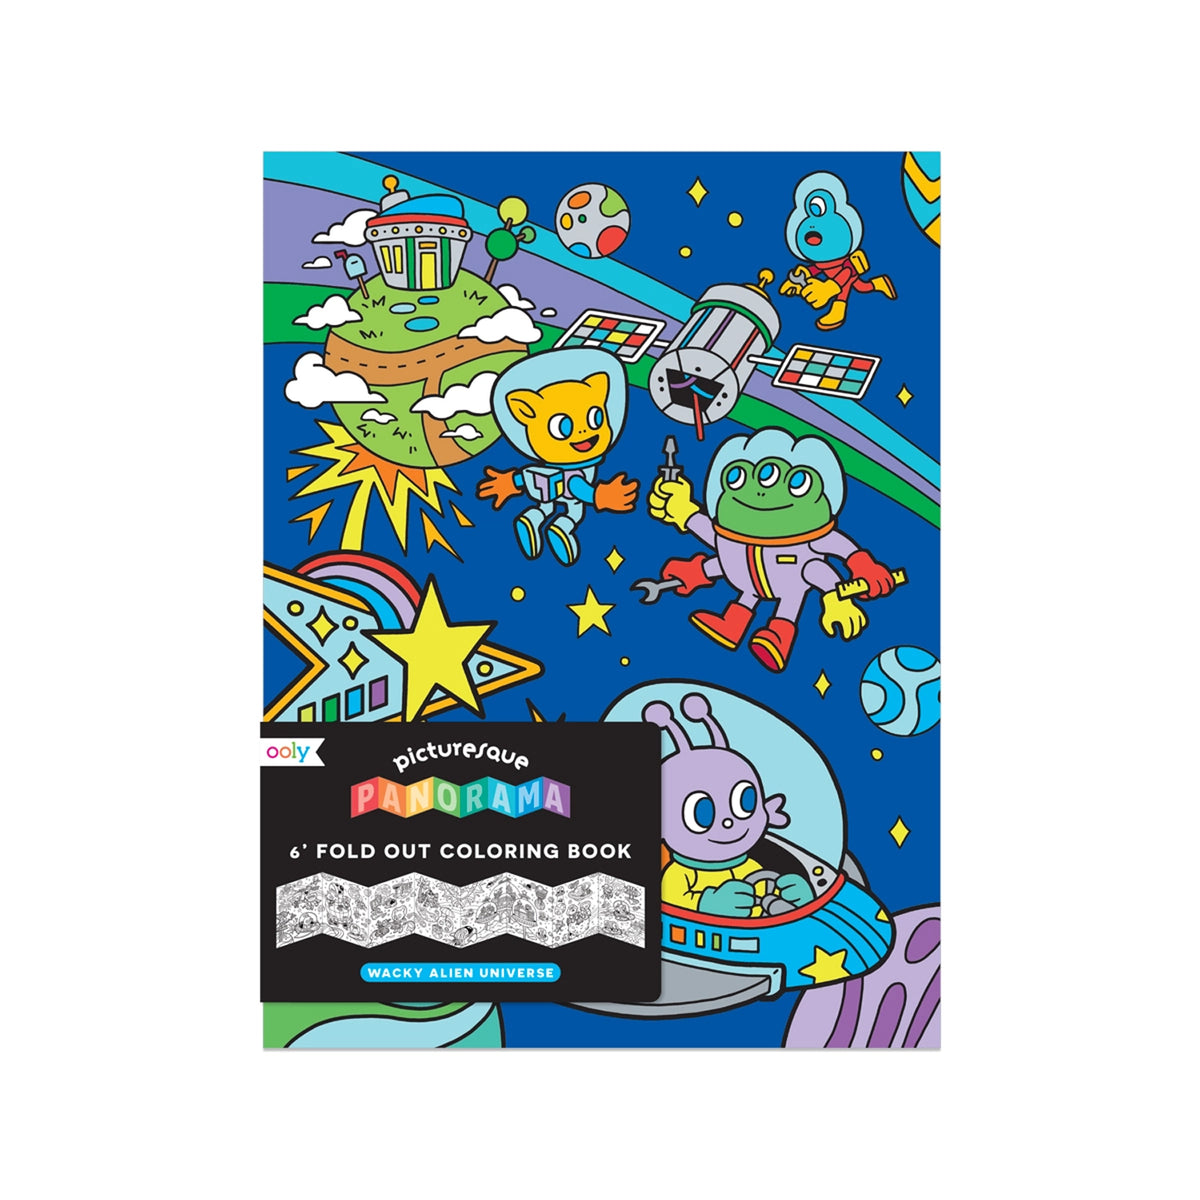 Picturesque Panorama Coloring Book - Wacky Alien Universe